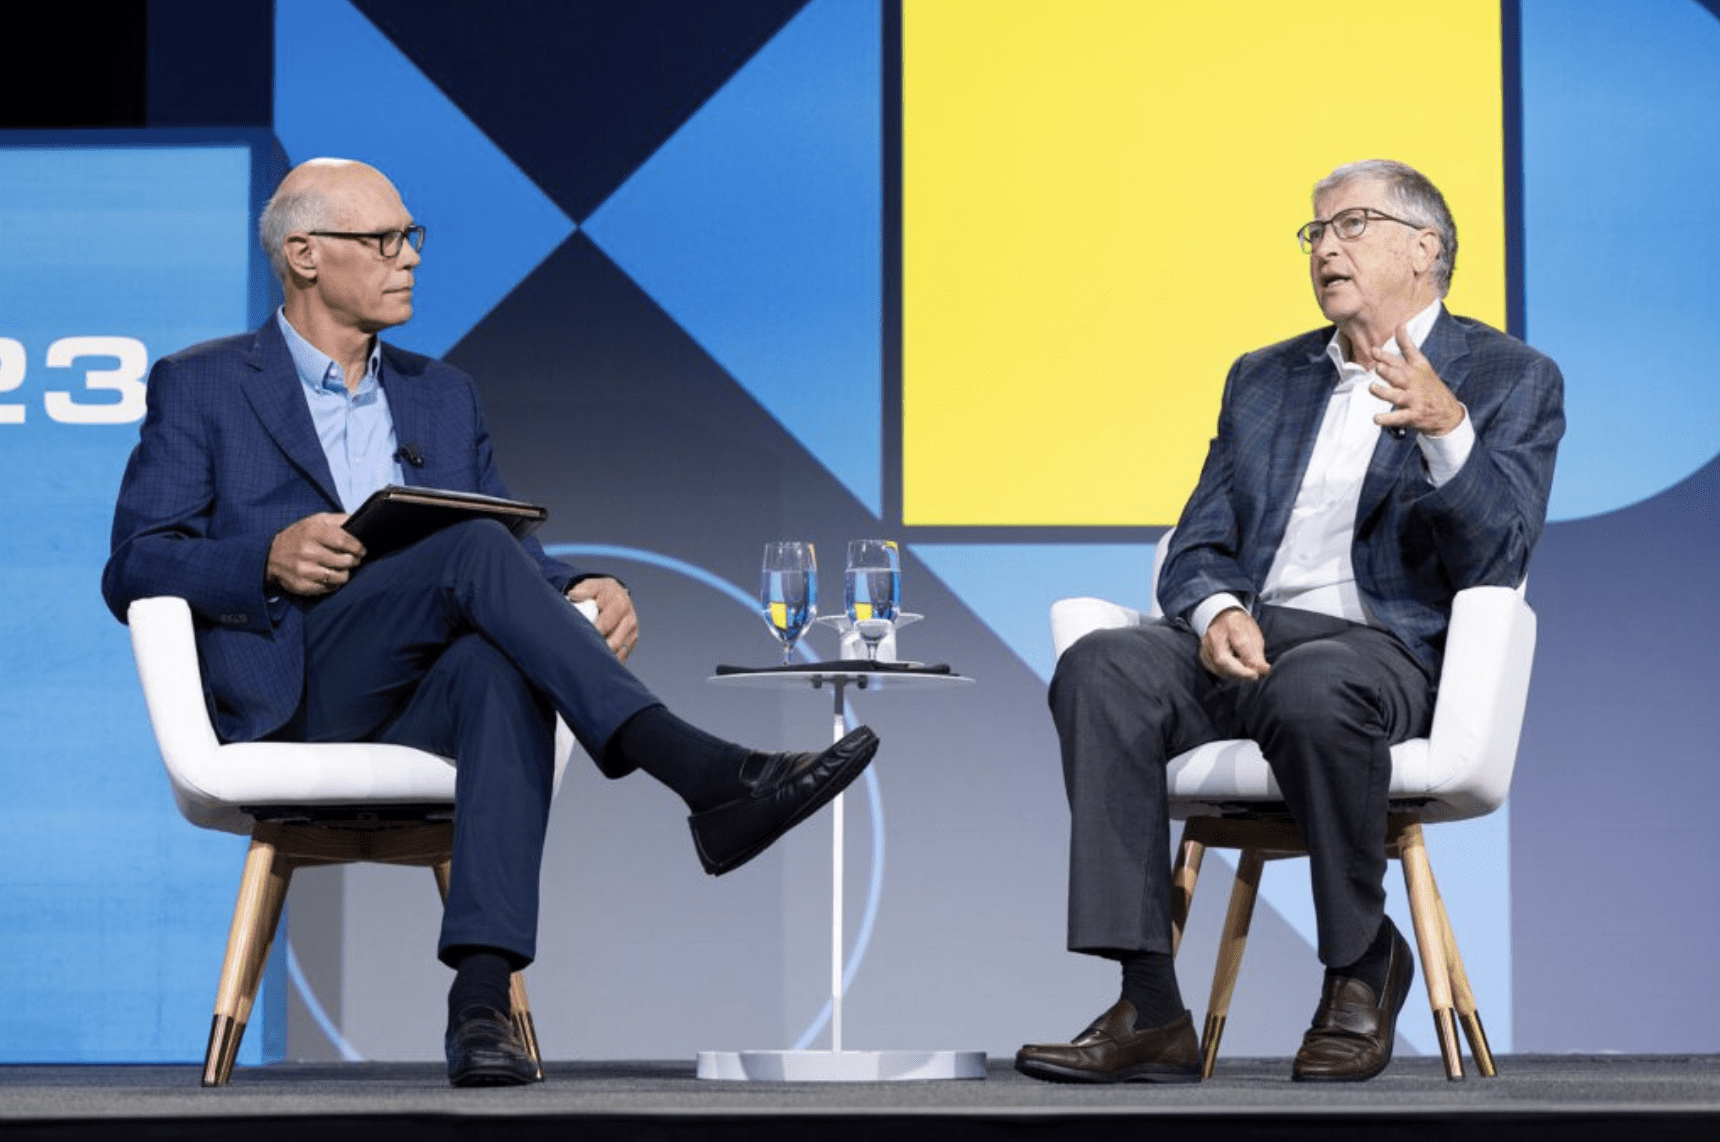 BE Founder Bill Gates on stage with EEI Chair Warner Baxter